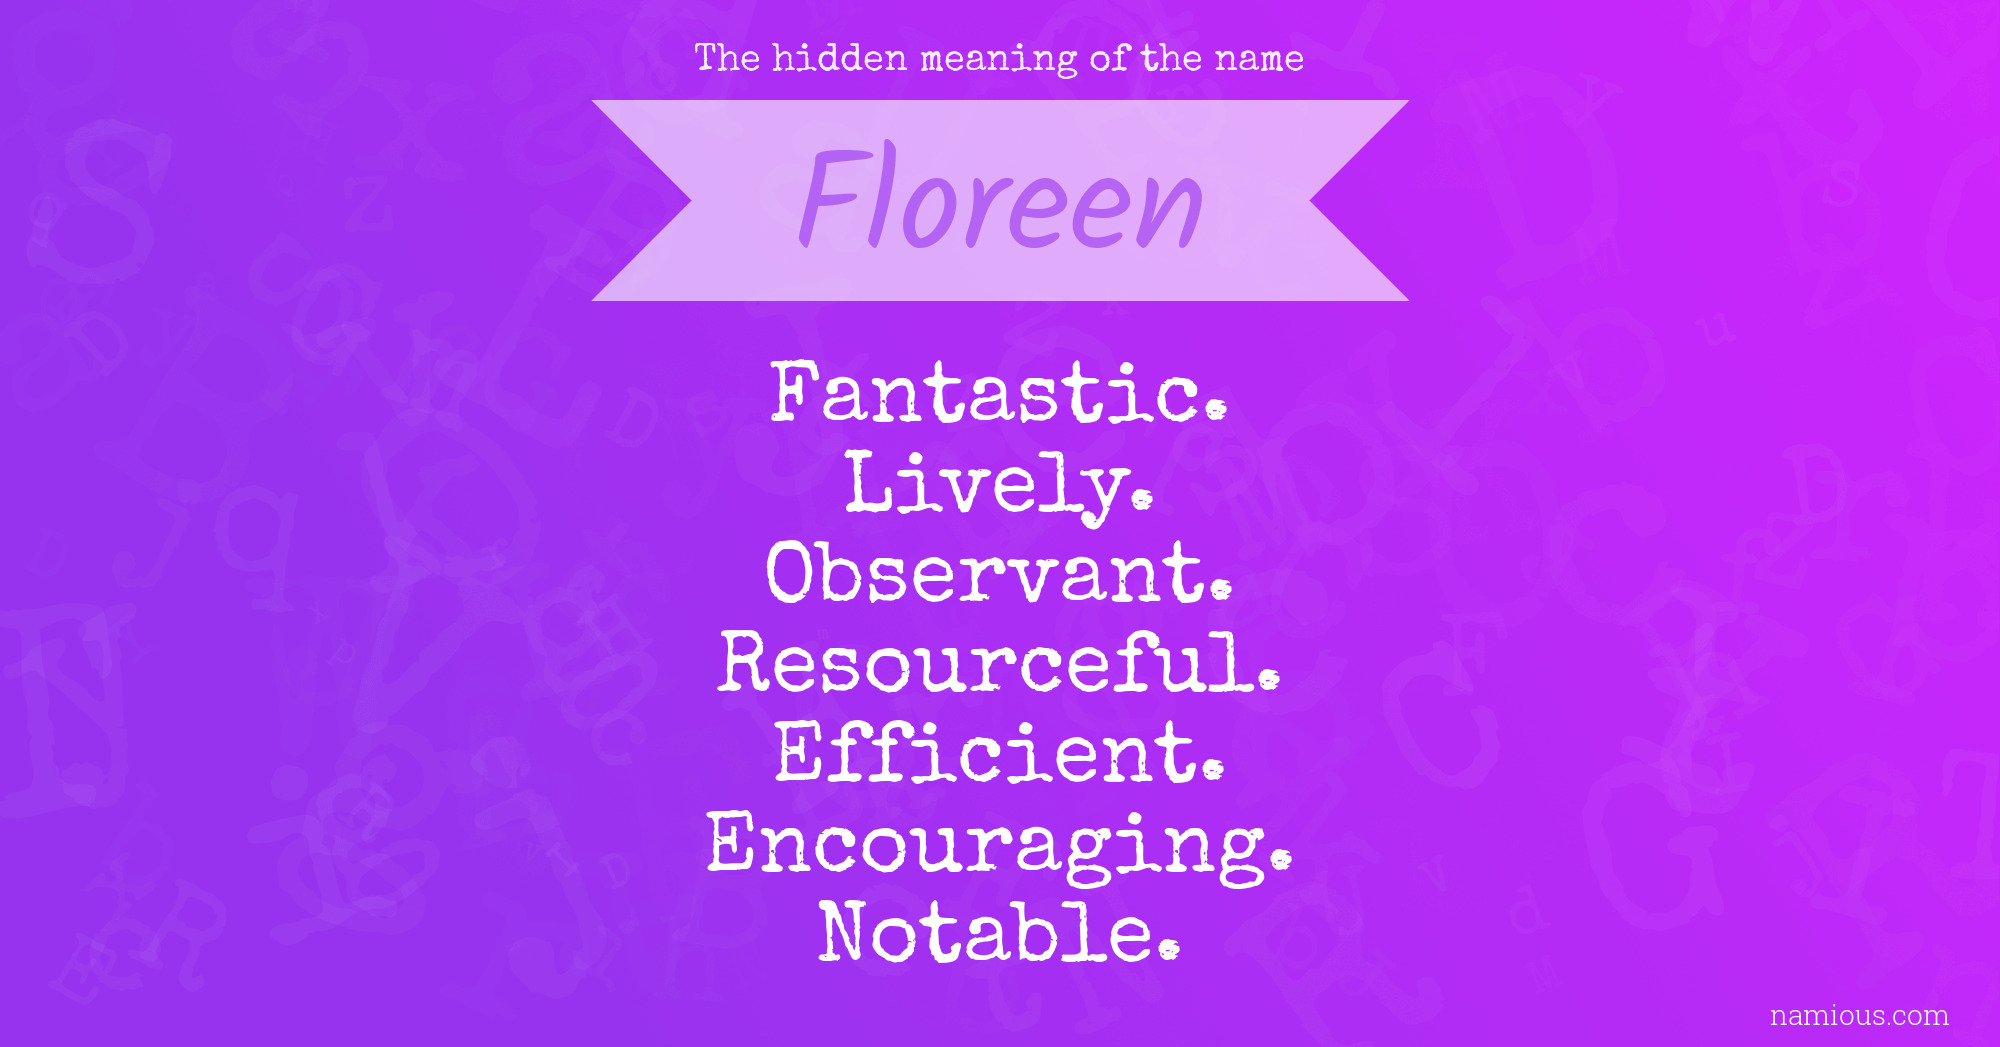 The hidden meaning of the name Floreen